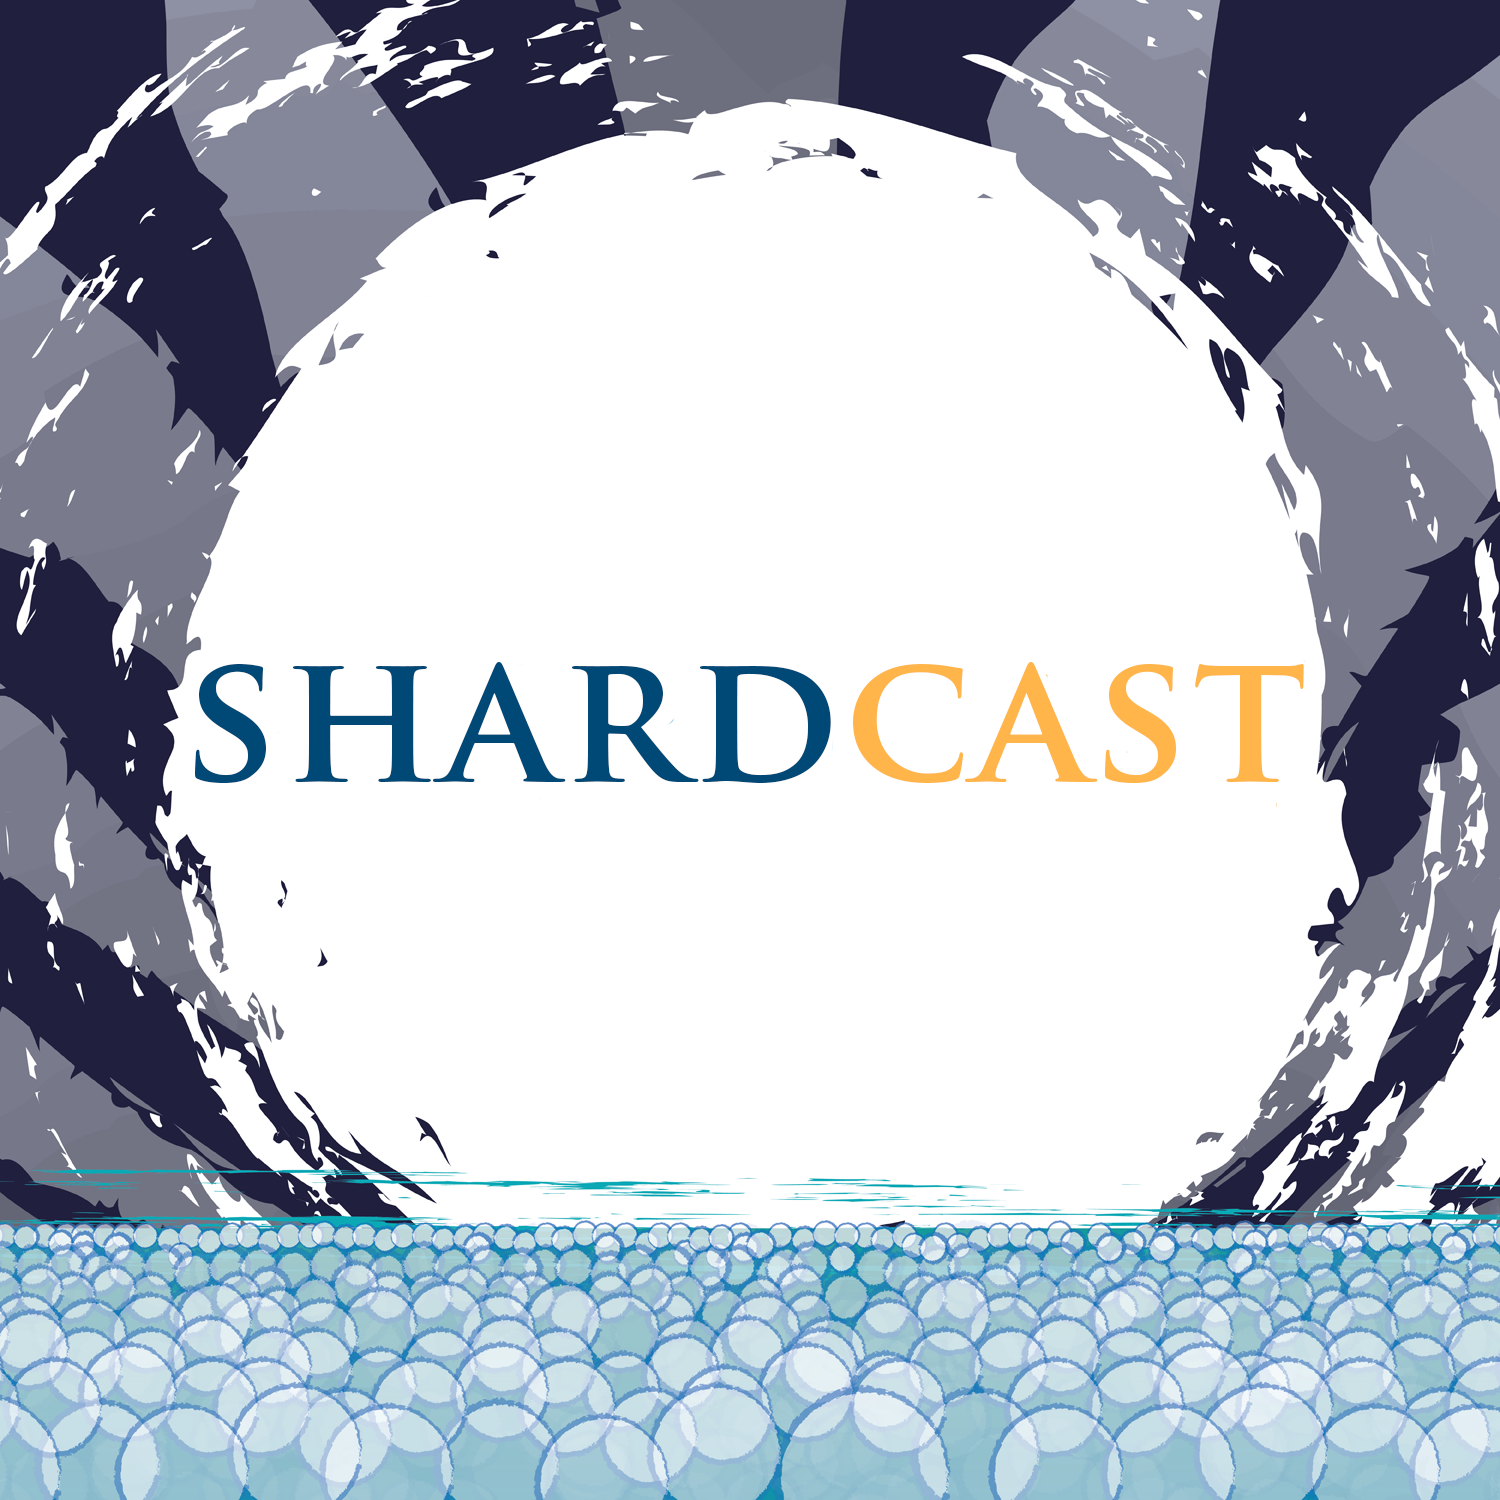 More information about "Shardcast: Adolin and Maya"